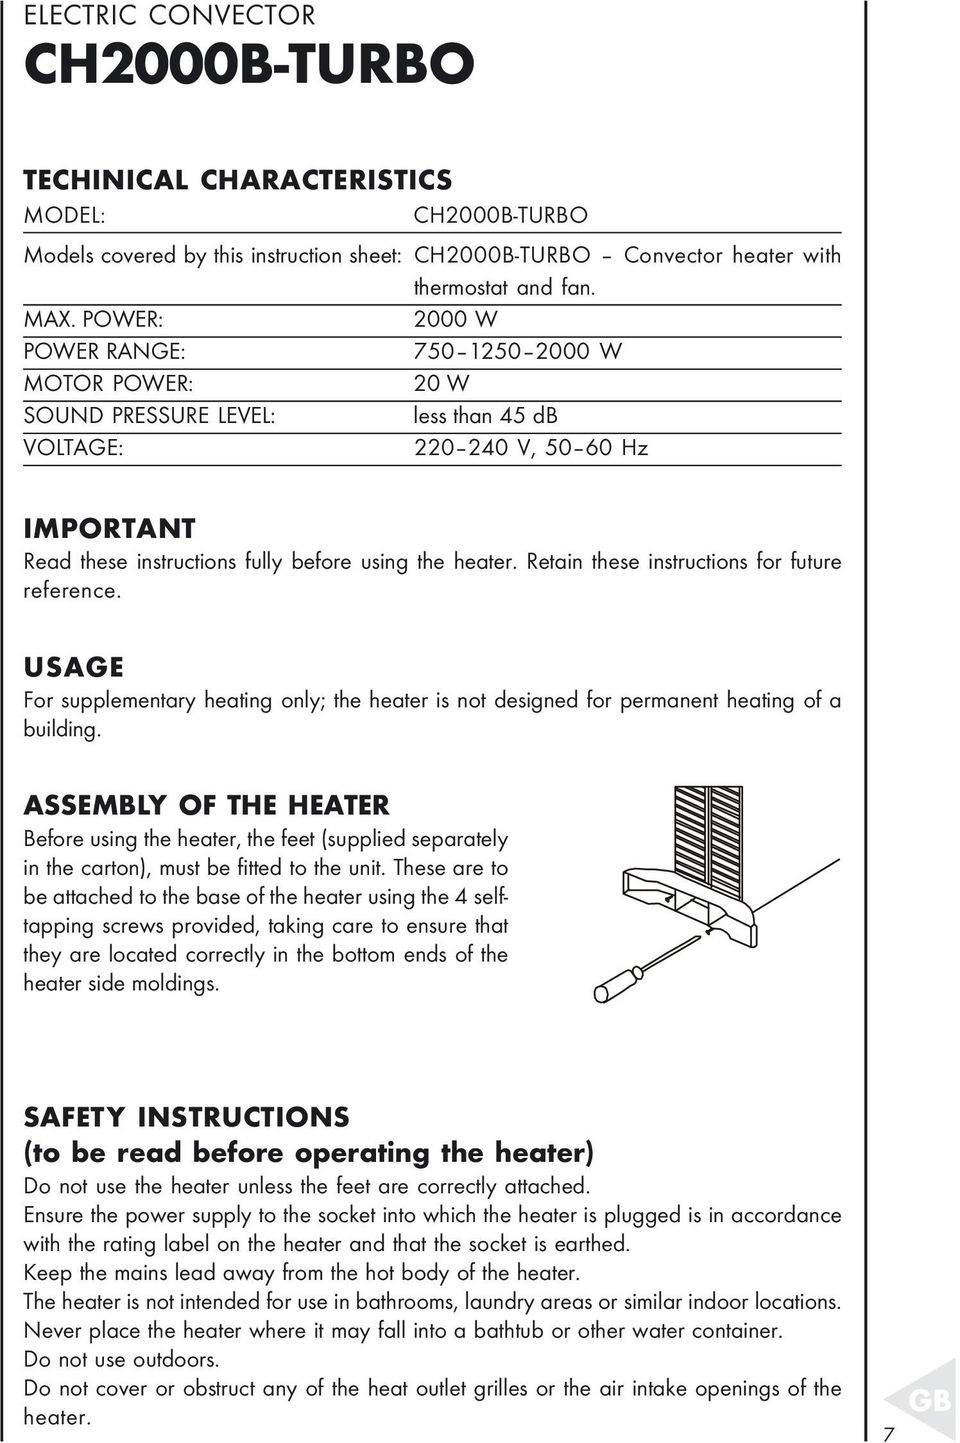 Retain these instructions for future reference. USAGE For supplementary heating only; the heater is not designed for permanent heating of a building.